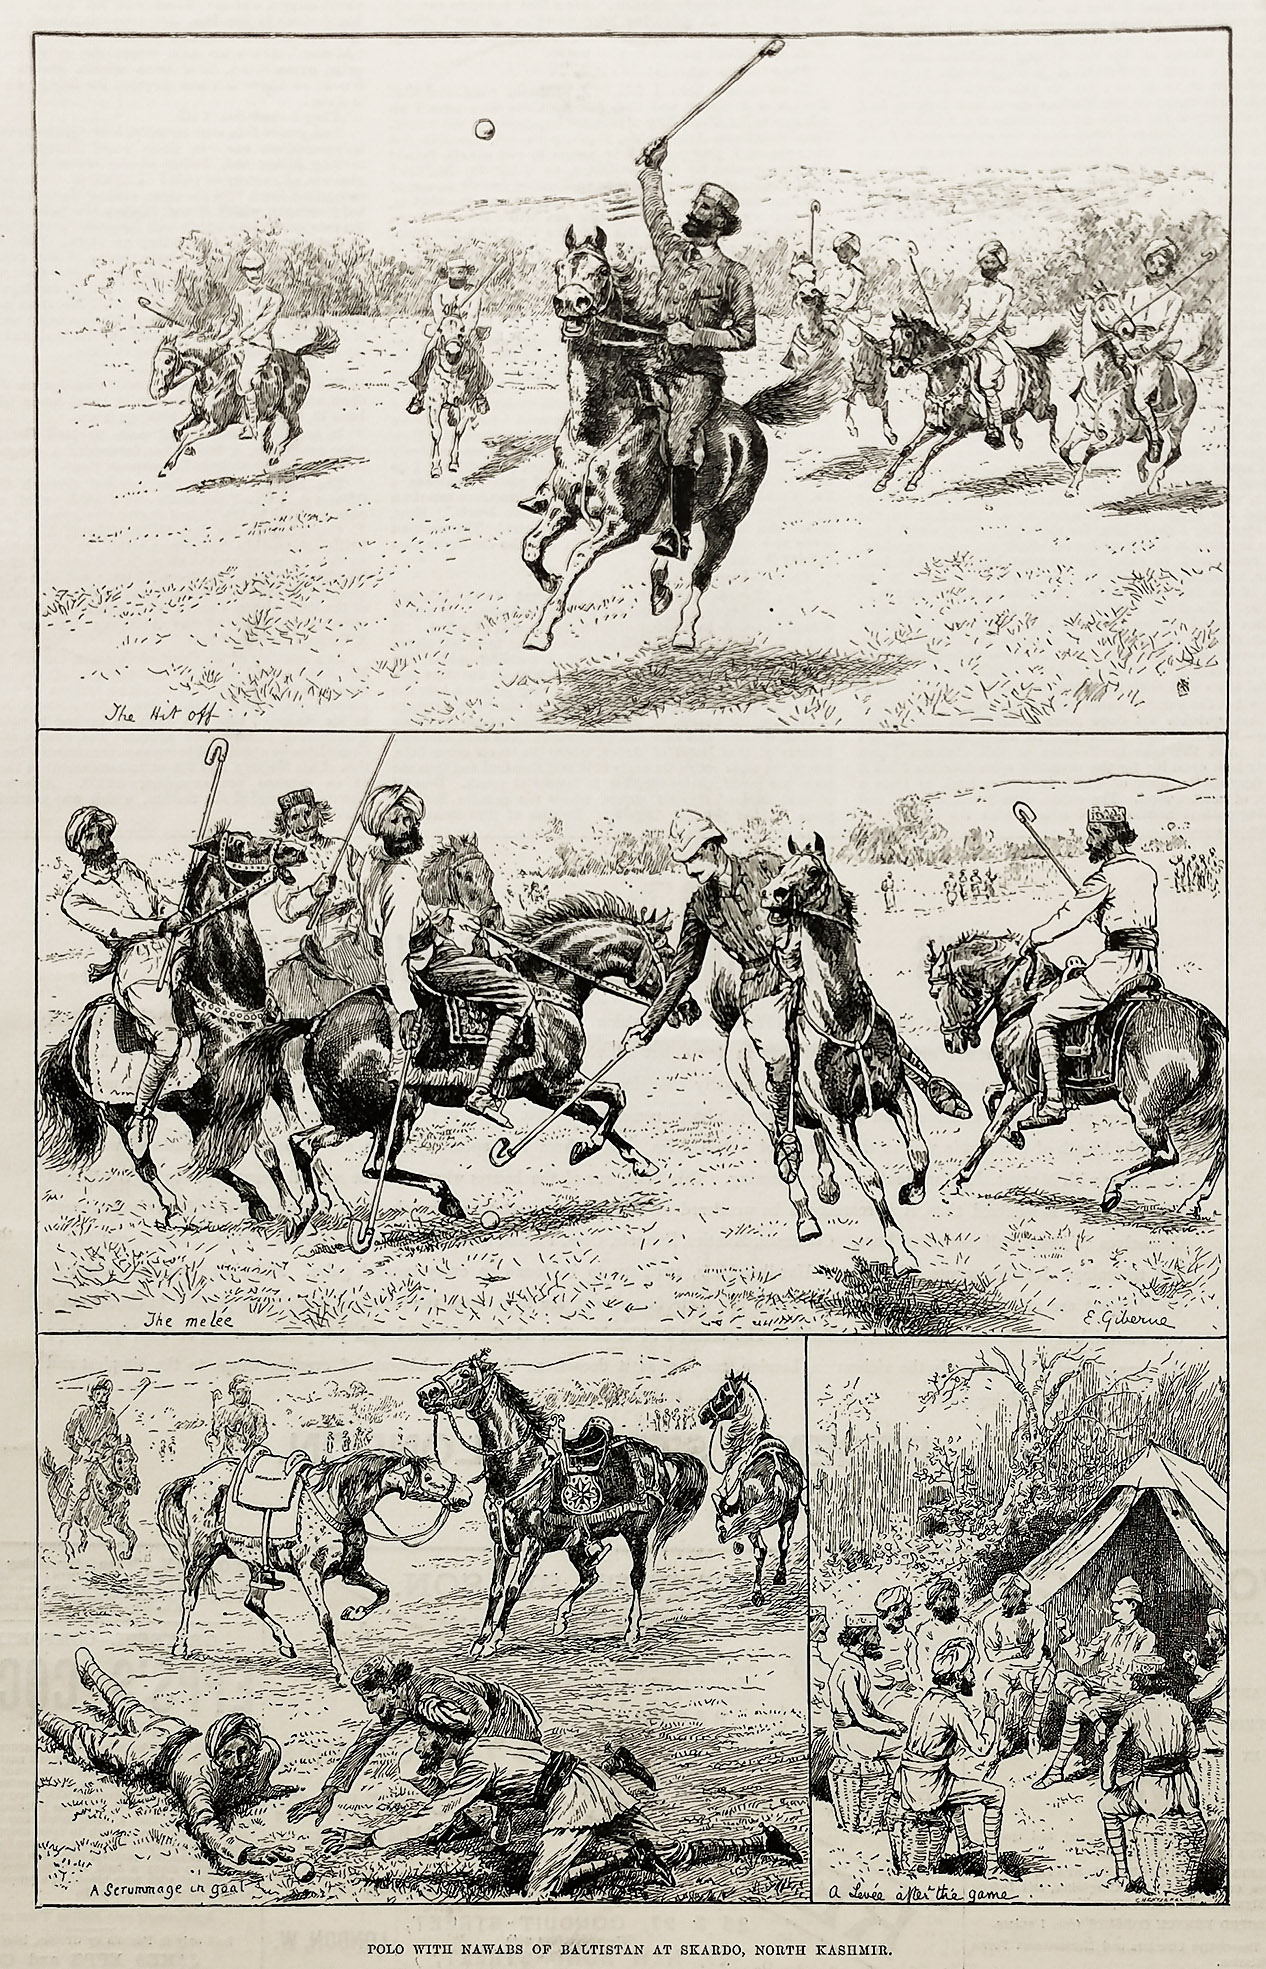 Polo with Nawabs of Baltistan at Skardo, North Kashmir. - Antique Print from 1889